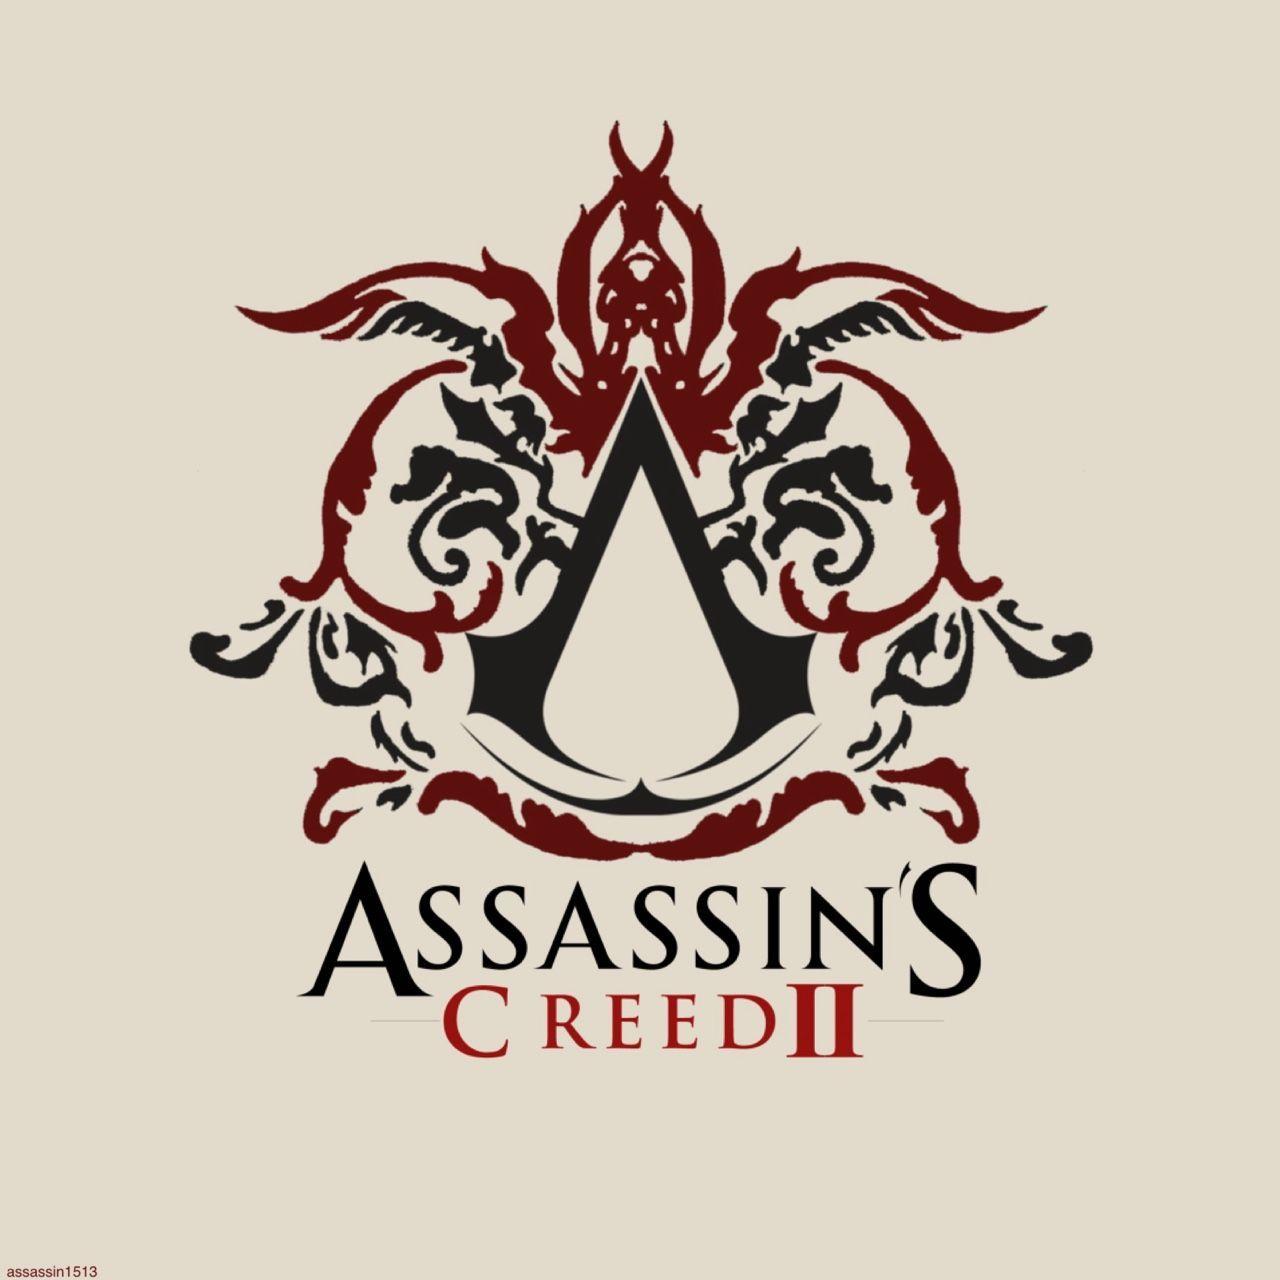 AC2 Logo - I love the assassin symbol on this one. Assassin's Creed